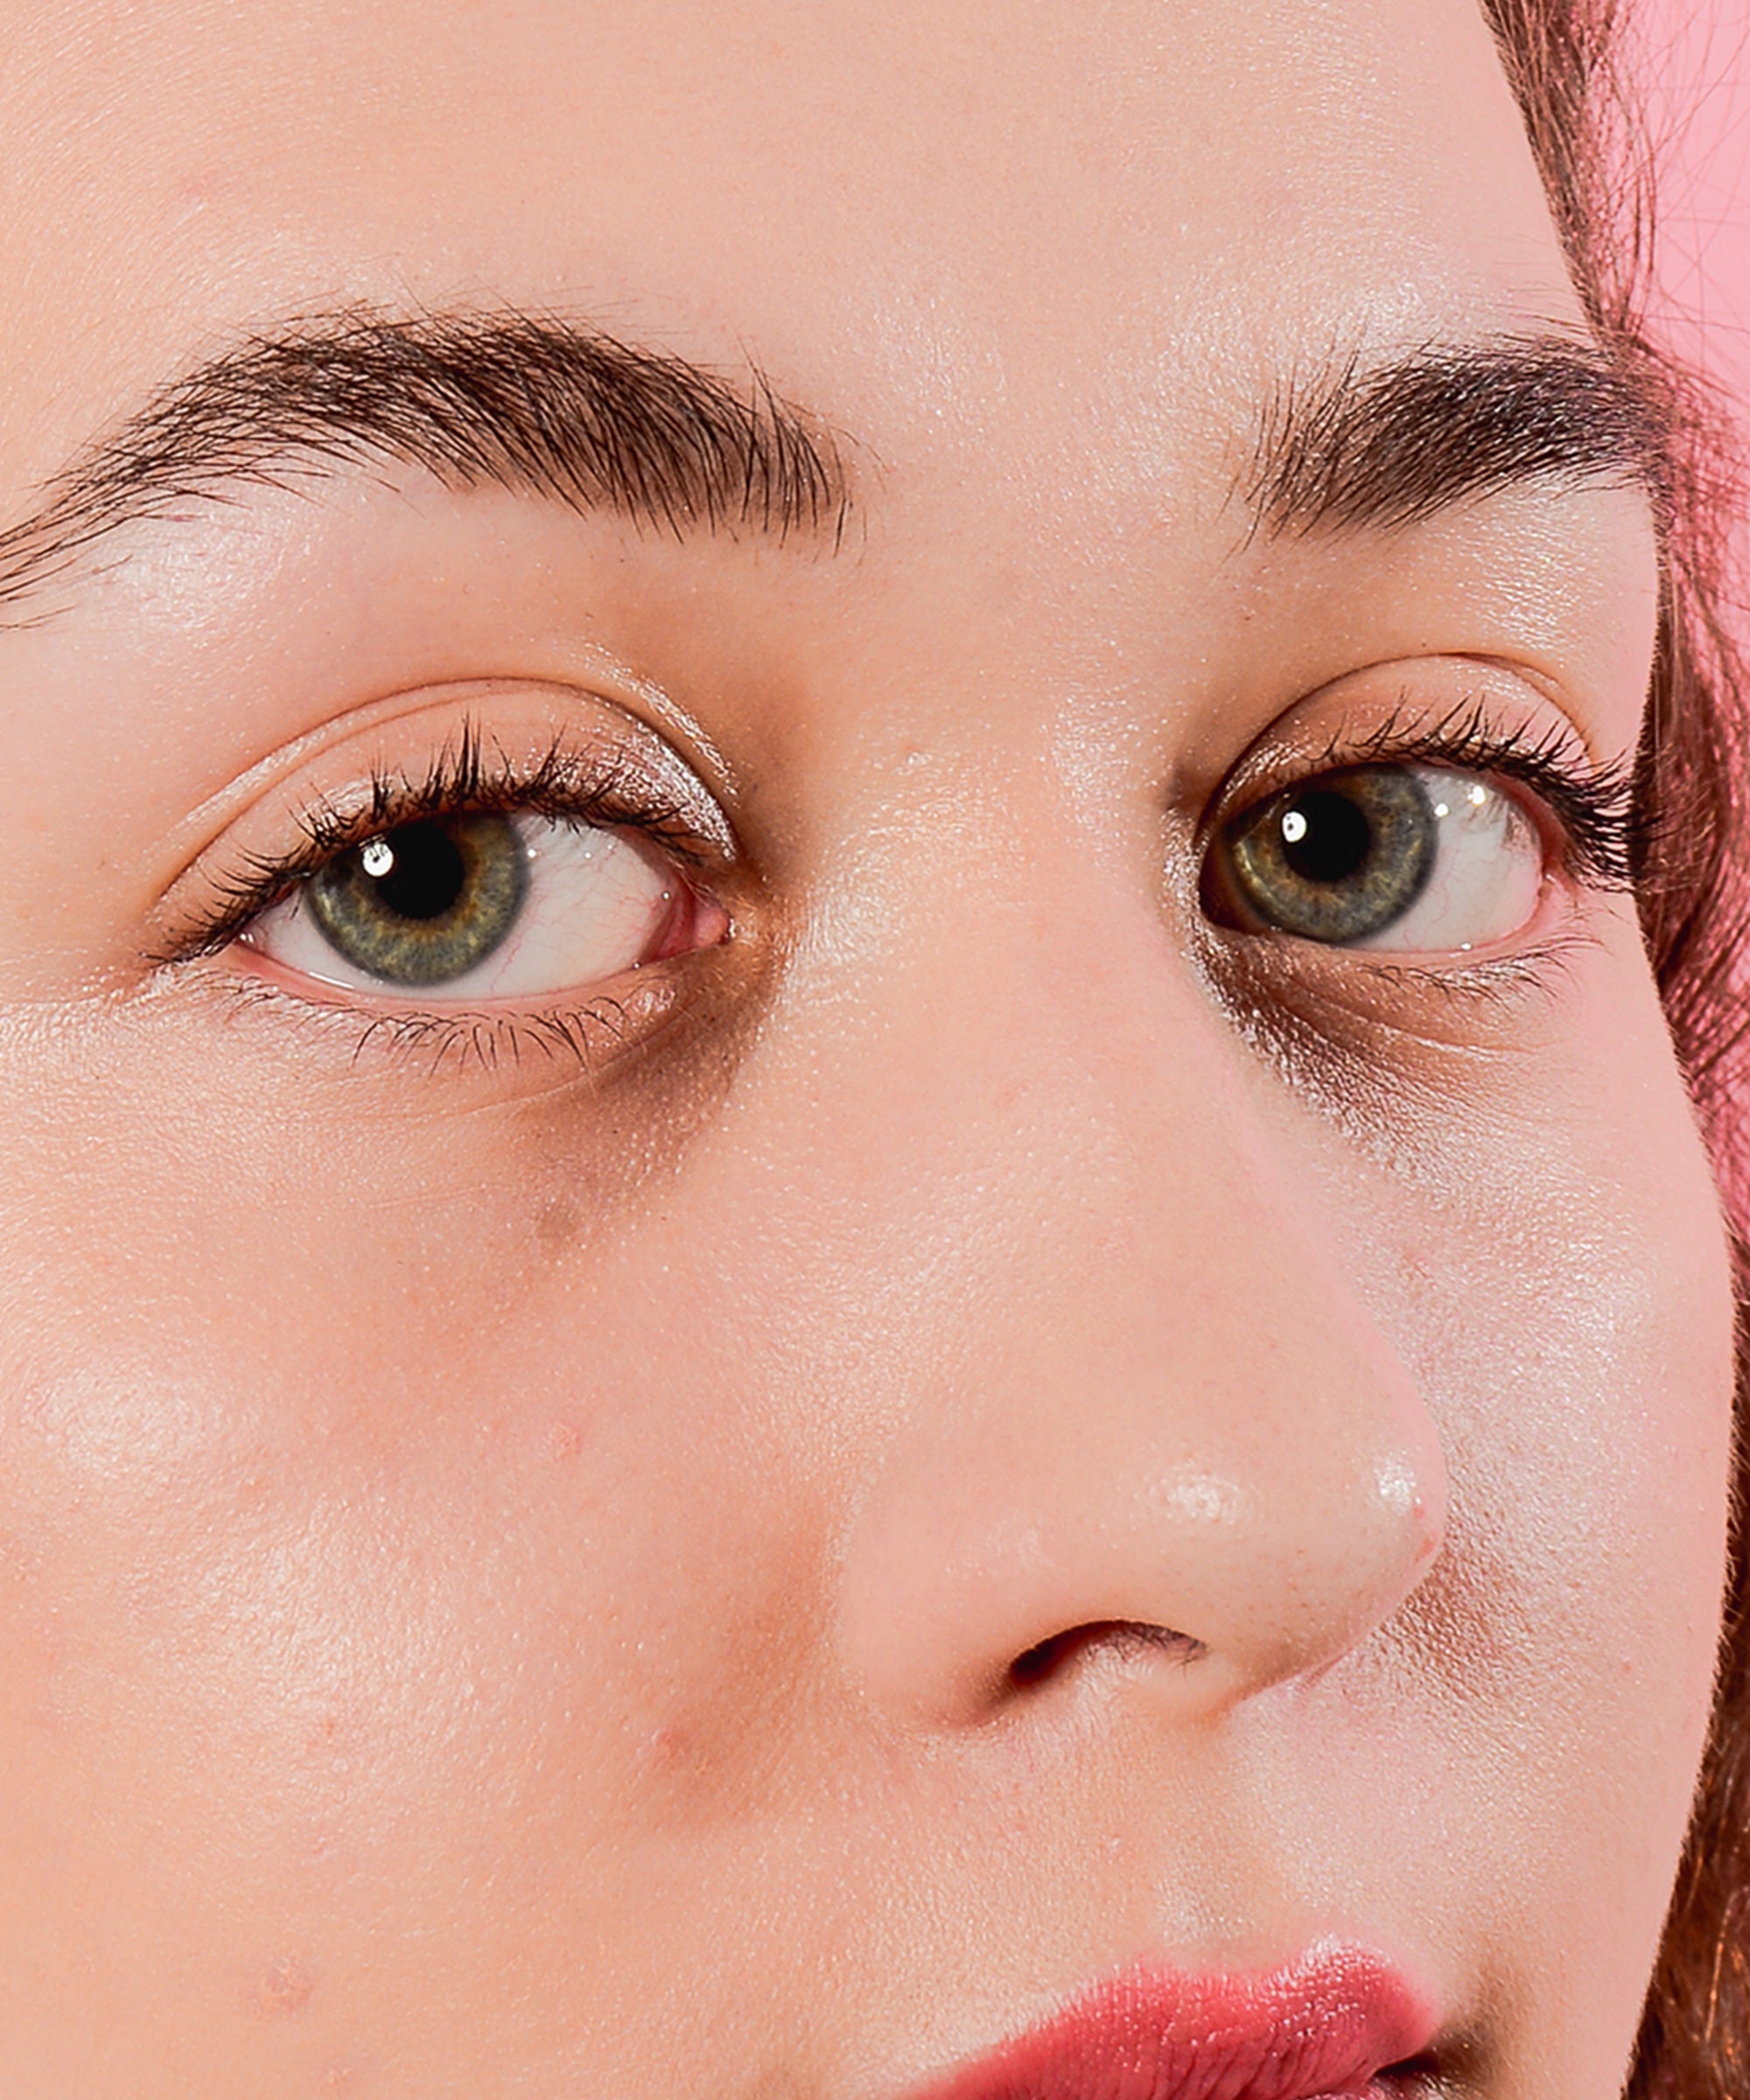 People on Social Media Are Using Eye Drops to Conceal Acne Redness